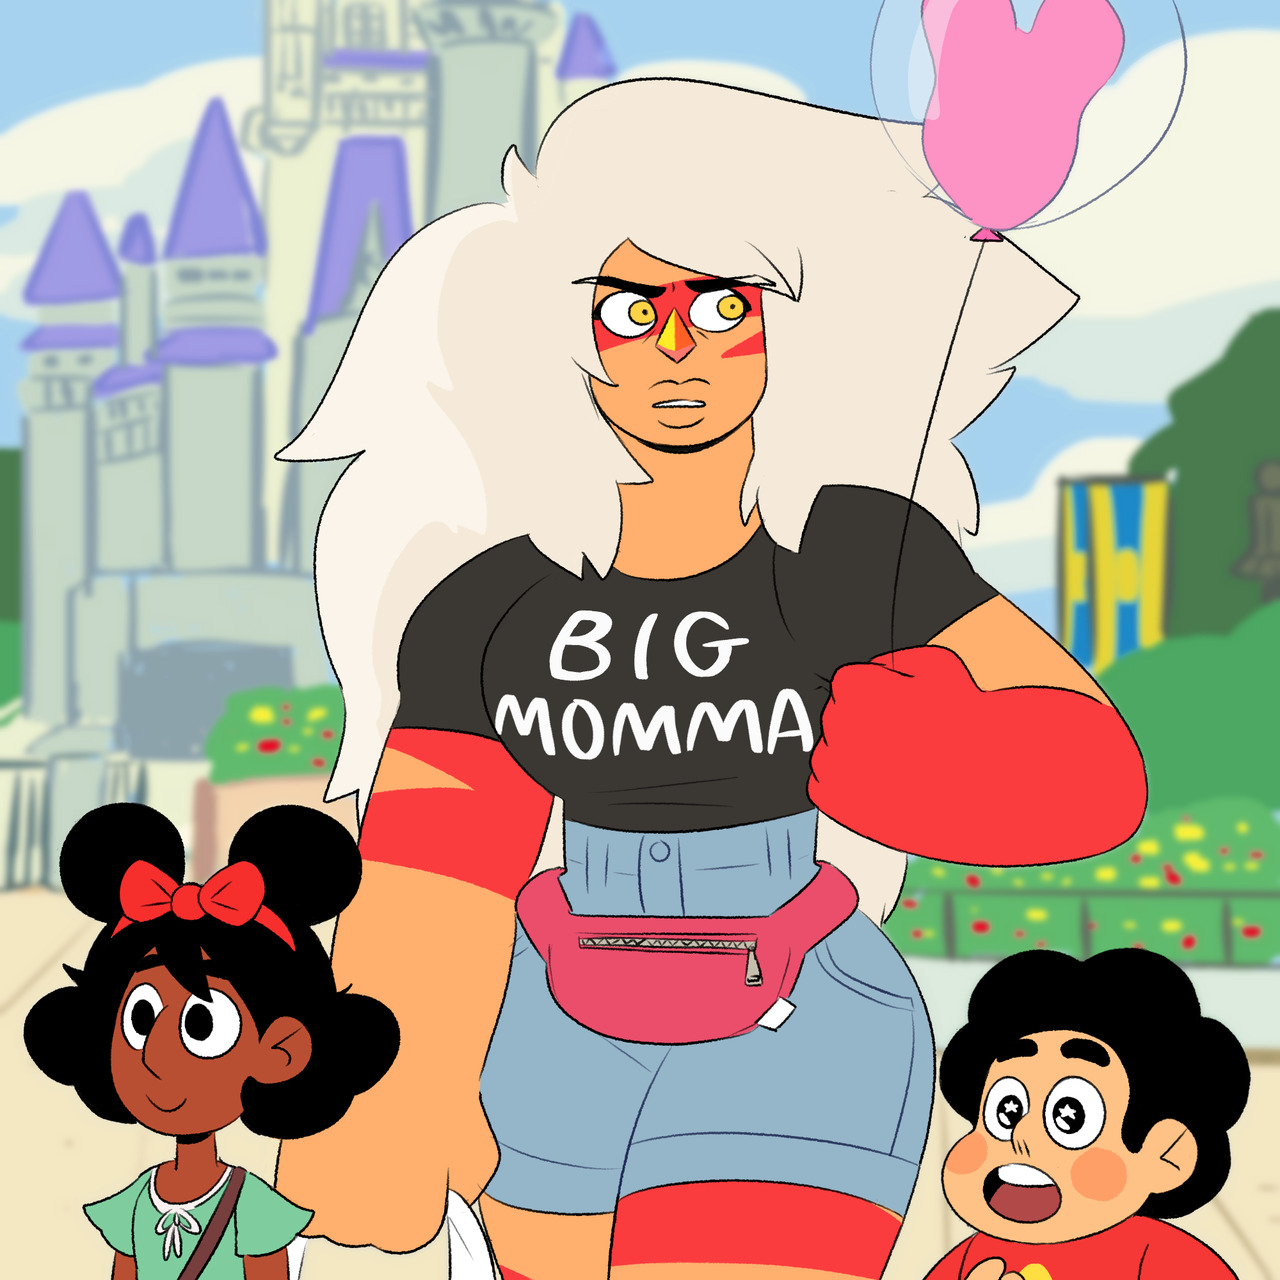 jasper hates every second she’s there and ends up getting banned from all disney parks for throwing gaston into a fountain bc he said he was stronger than her